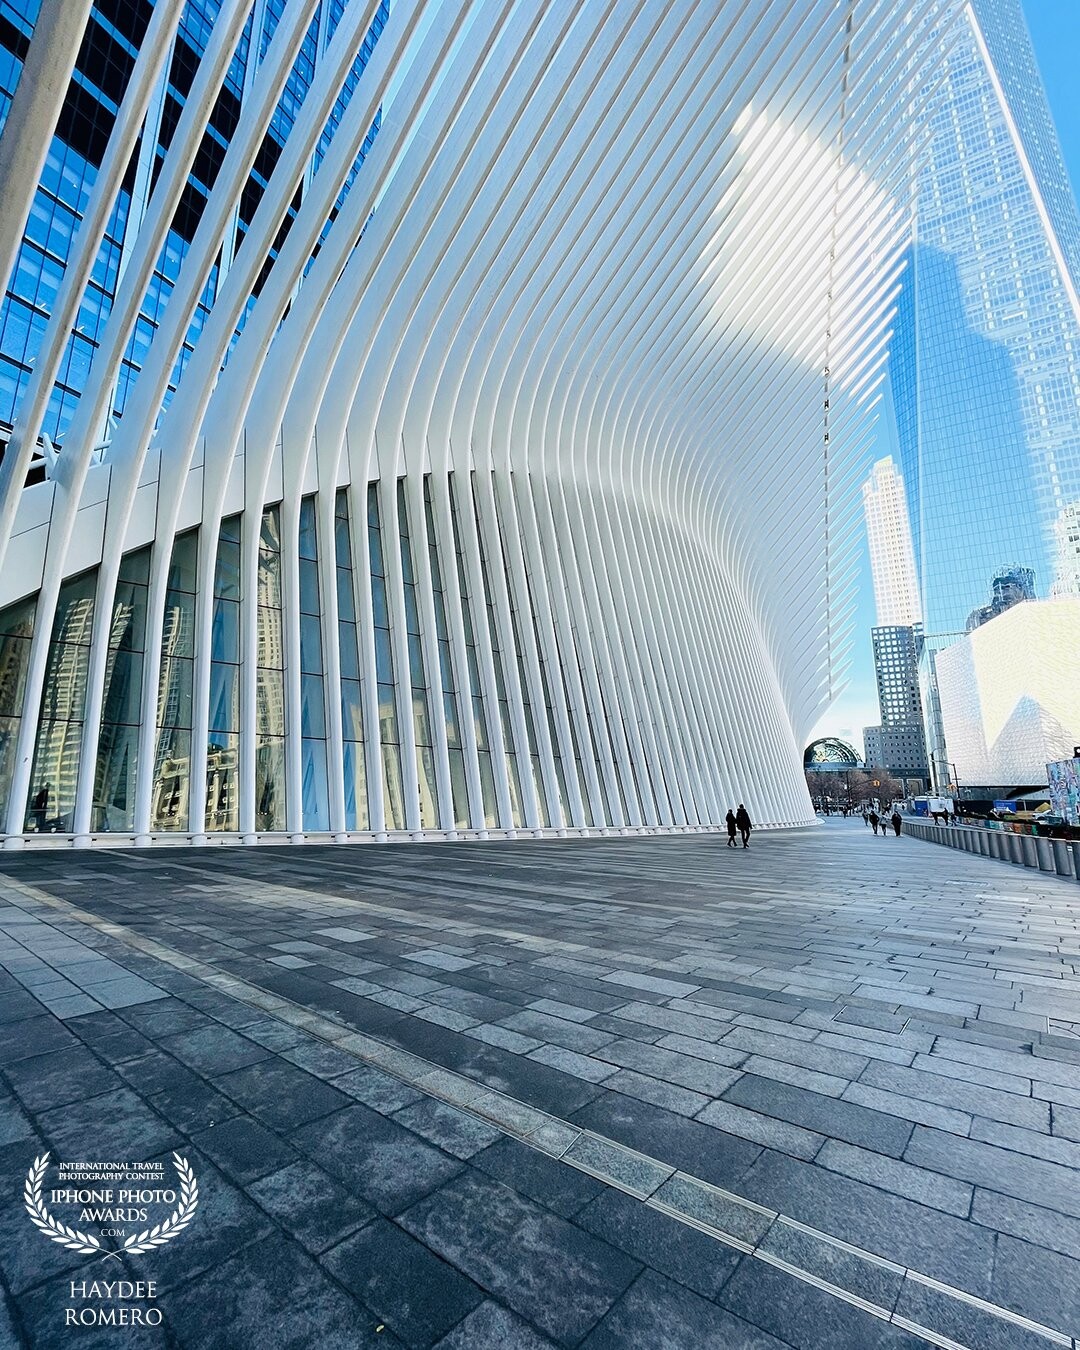 The ribbed walls of the Oculus building erected on the spot where the Twin Towers stood before 9/11 capture the sunlight and shadows of neighboring buildings on a recent more in New York City.